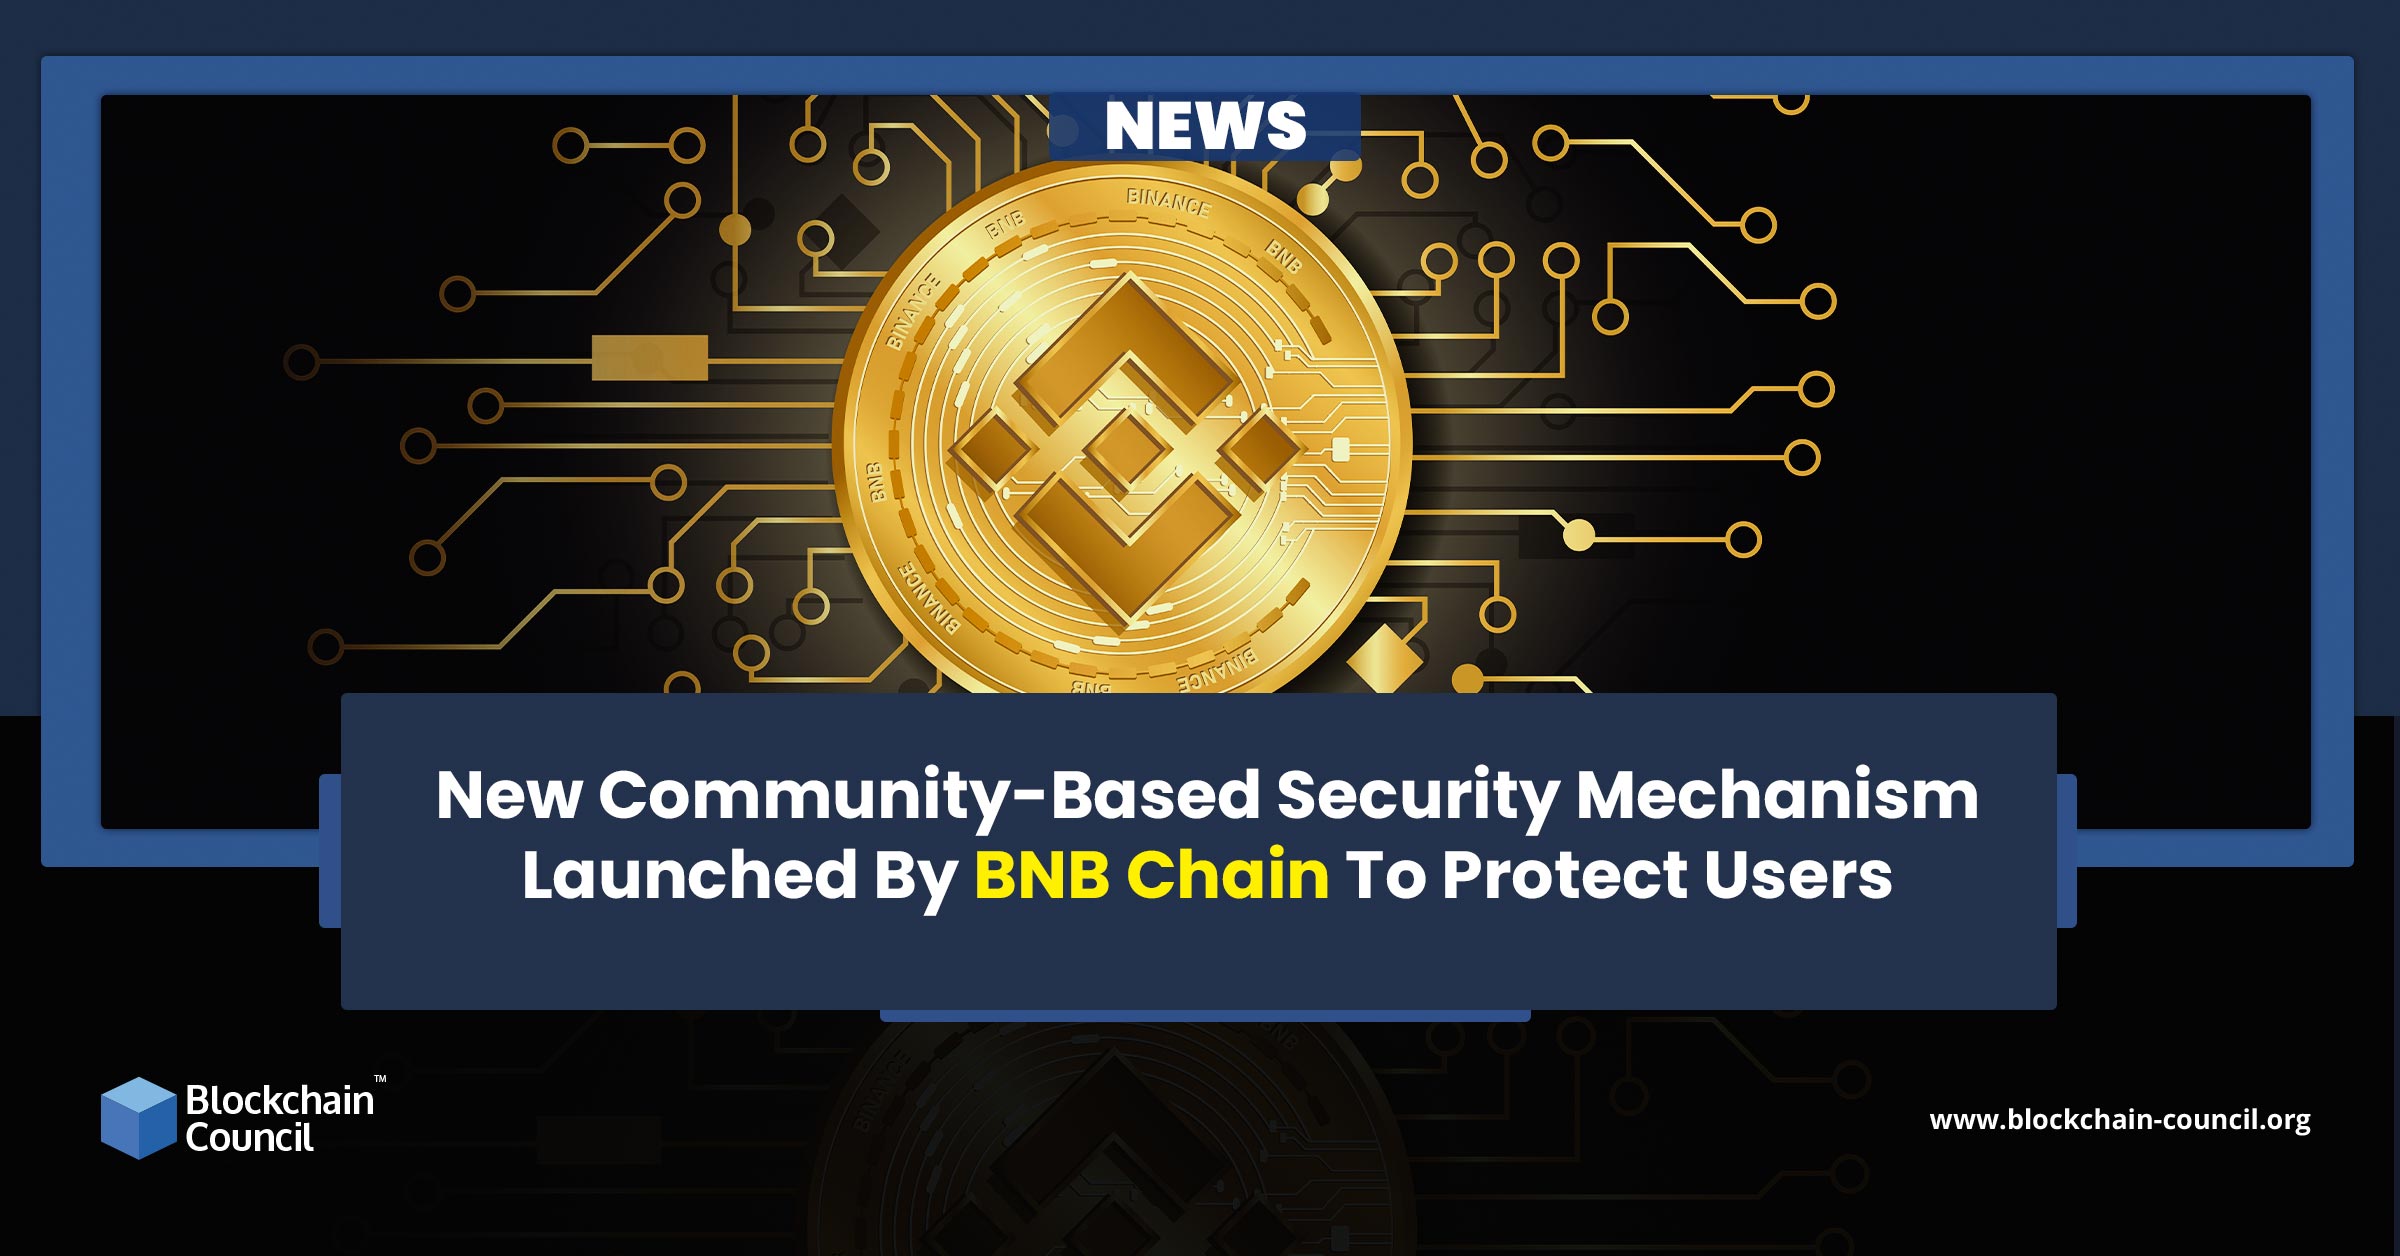 New Community-Based Security Mechanism Launched By BNB Chain To Protect Users